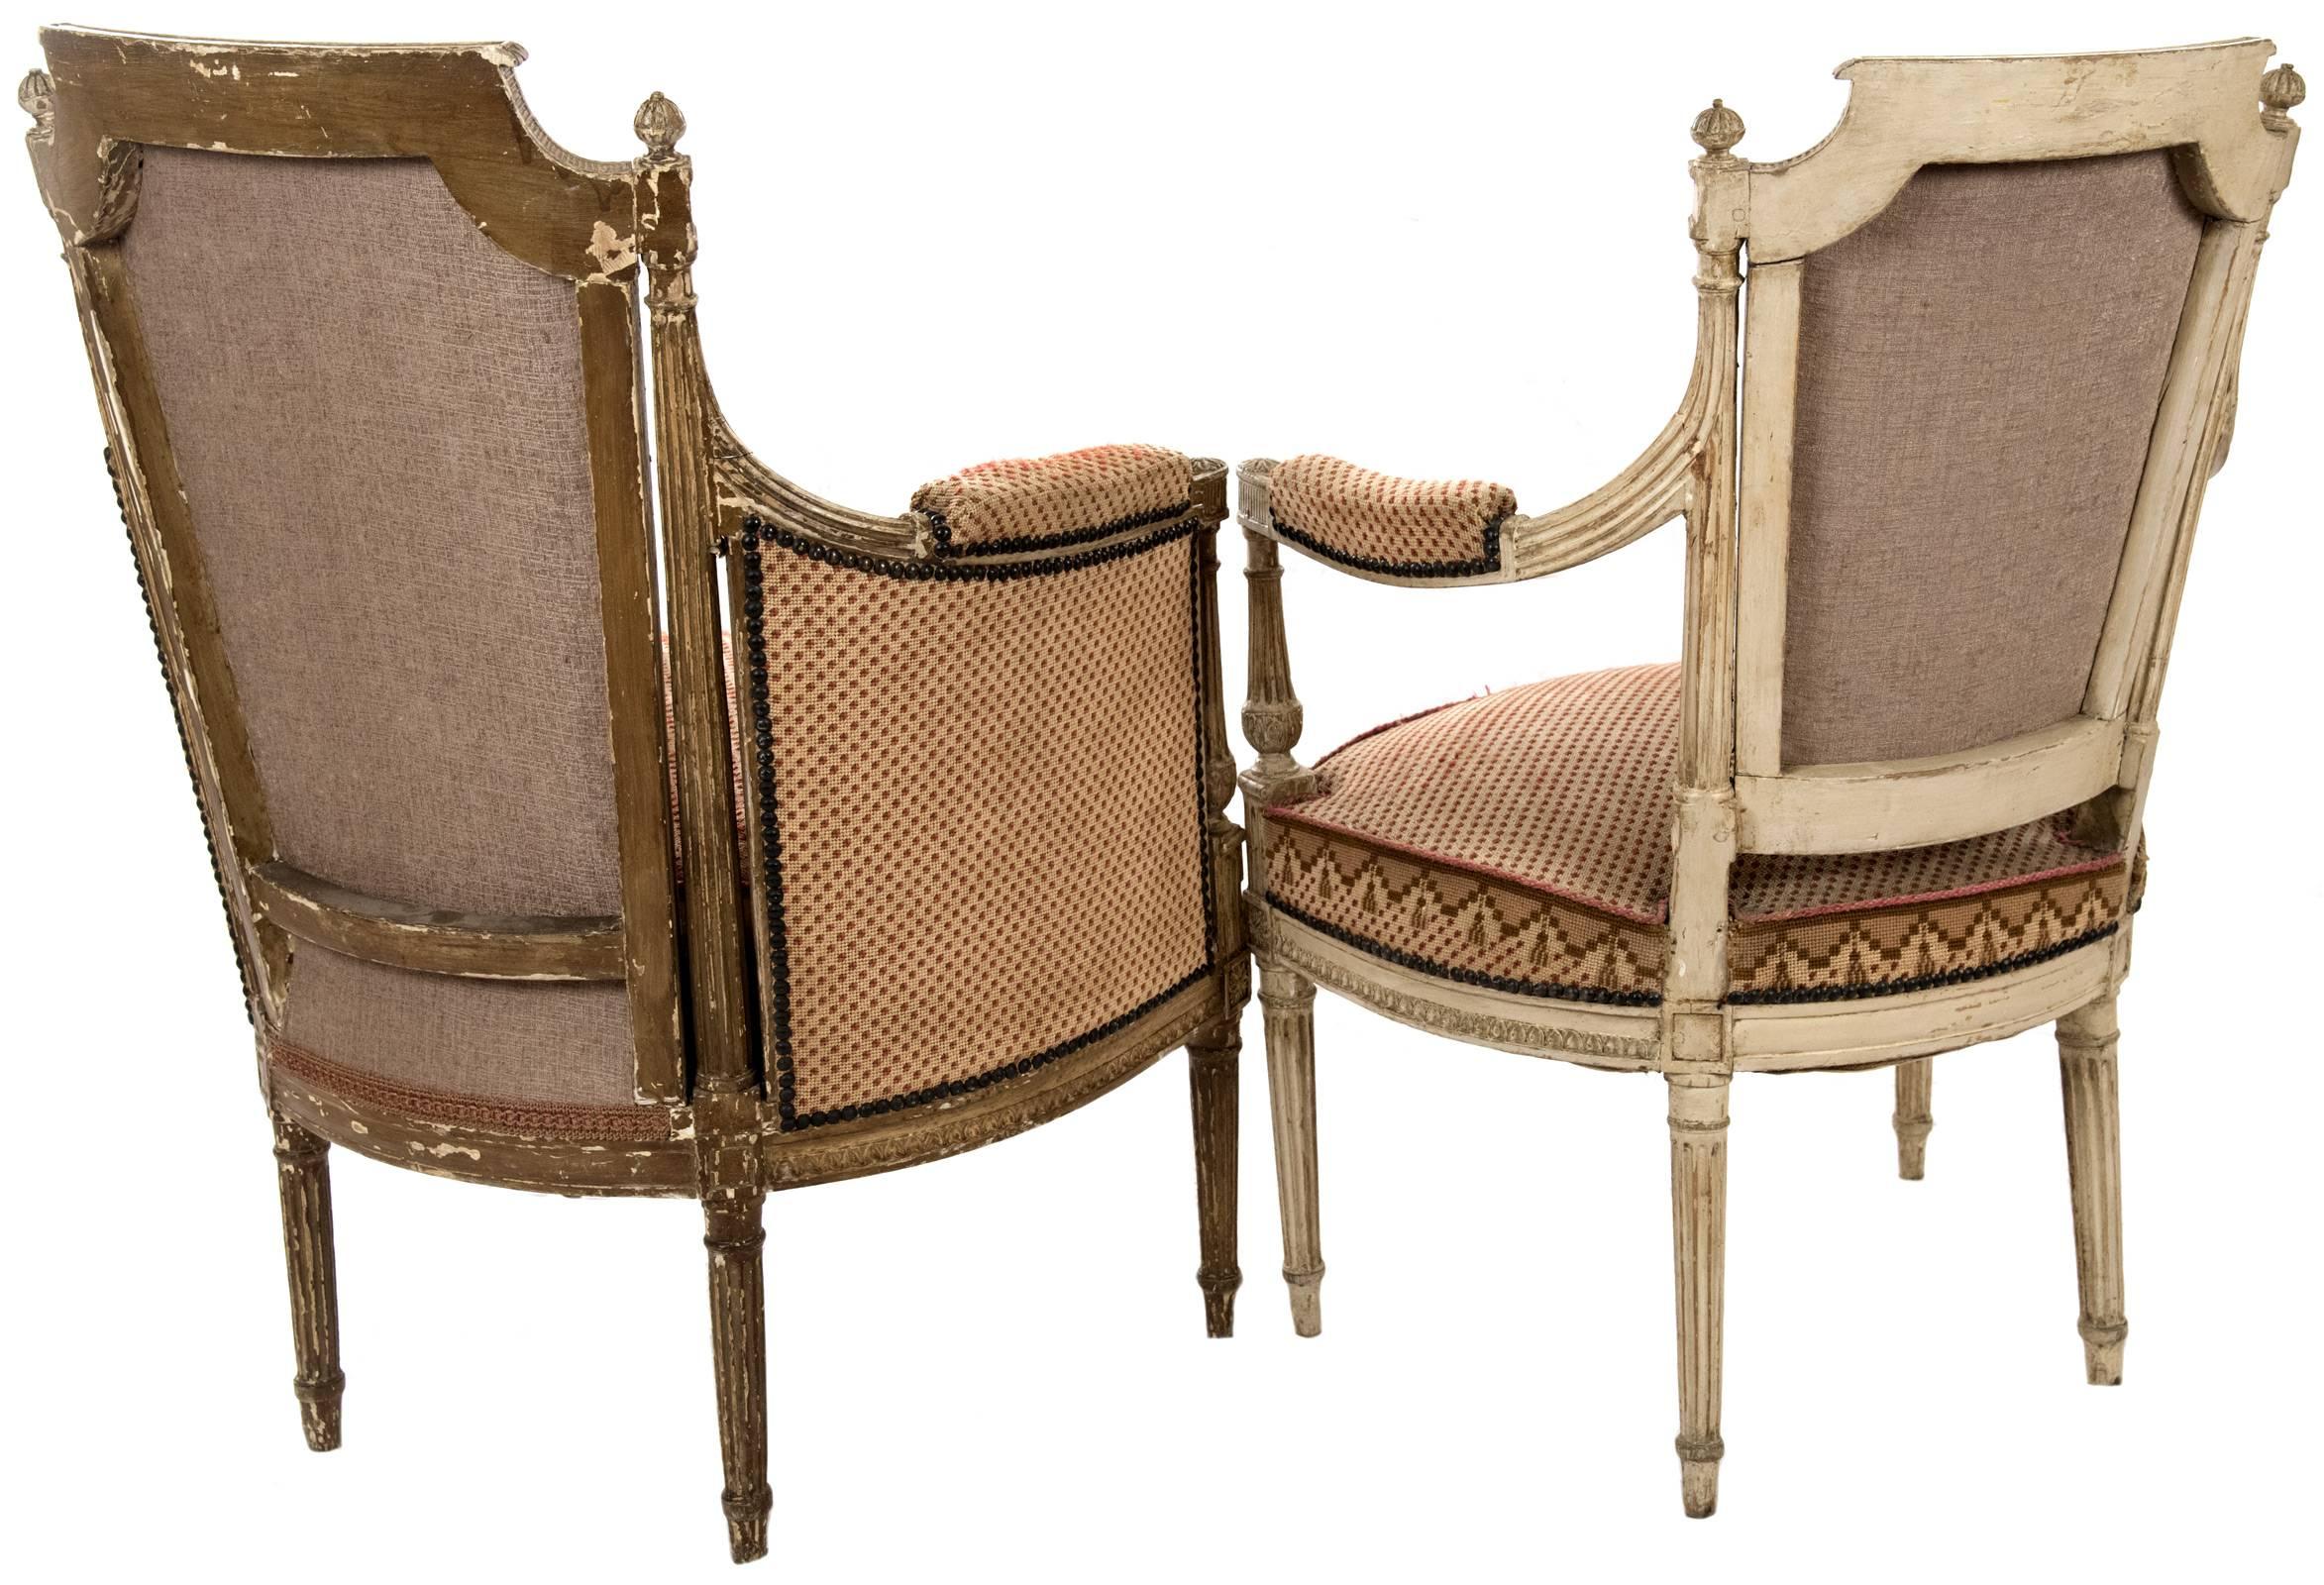 Two matching pairs of late 18th century Louis XVI armchairs with original, rich red and white silk upholstery. Both pair feature low-relief carvings of fluted columns, floral sprays, and acanthus leaves. One set is barrel shaped, with stuffed and